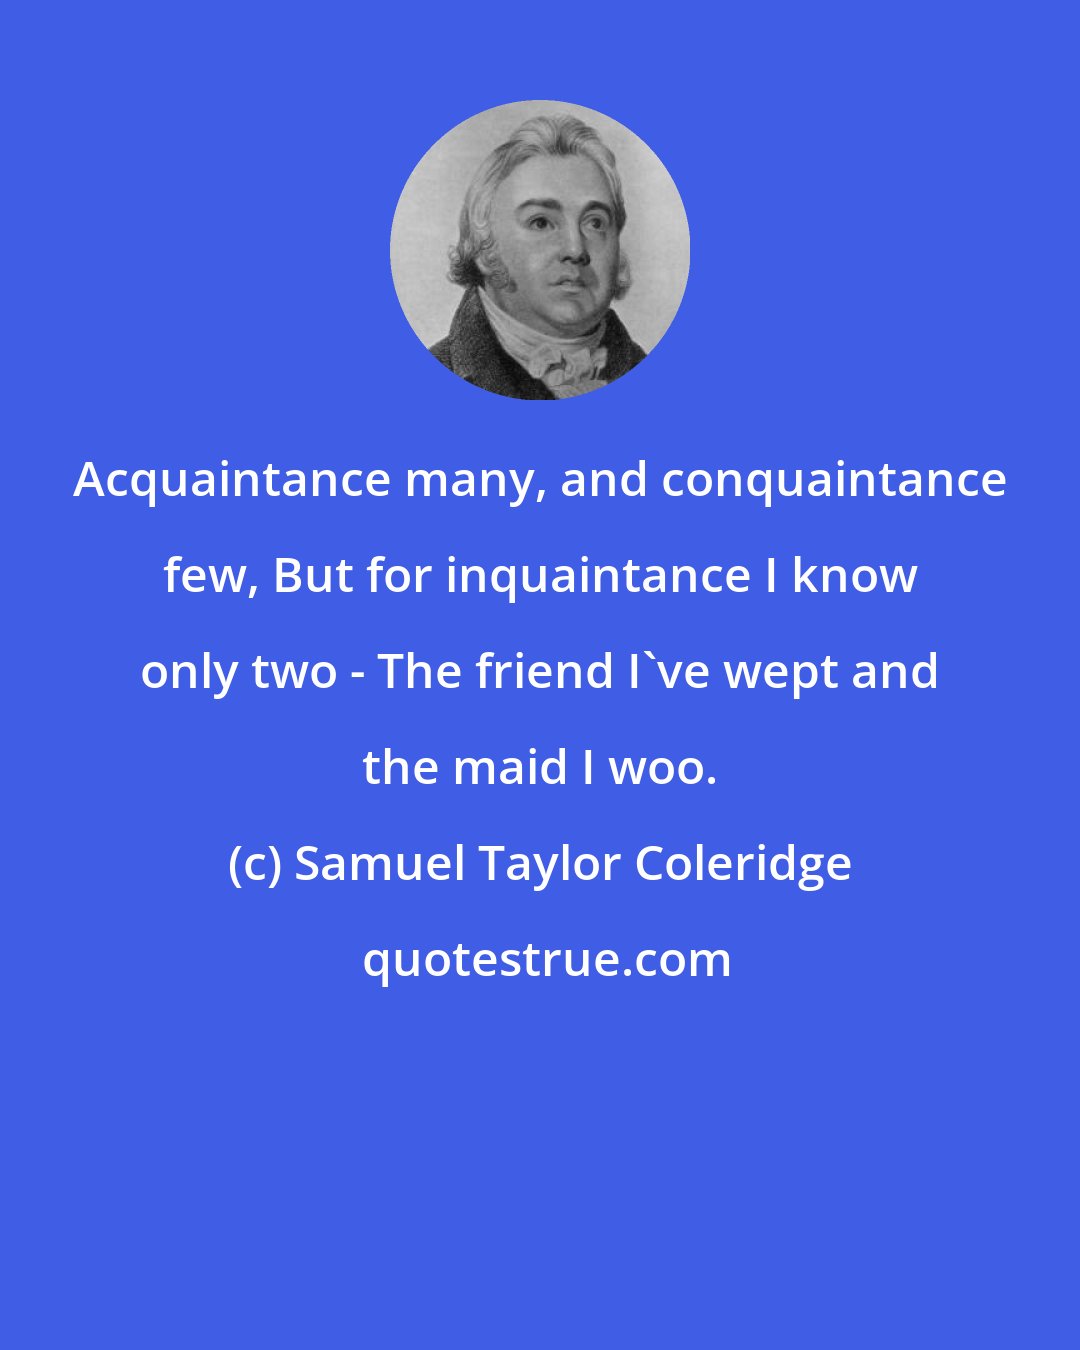 Samuel Taylor Coleridge: Acquaintance many, and conquaintance few, But for inquaintance I know only two - The friend I've wept and the maid I woo.